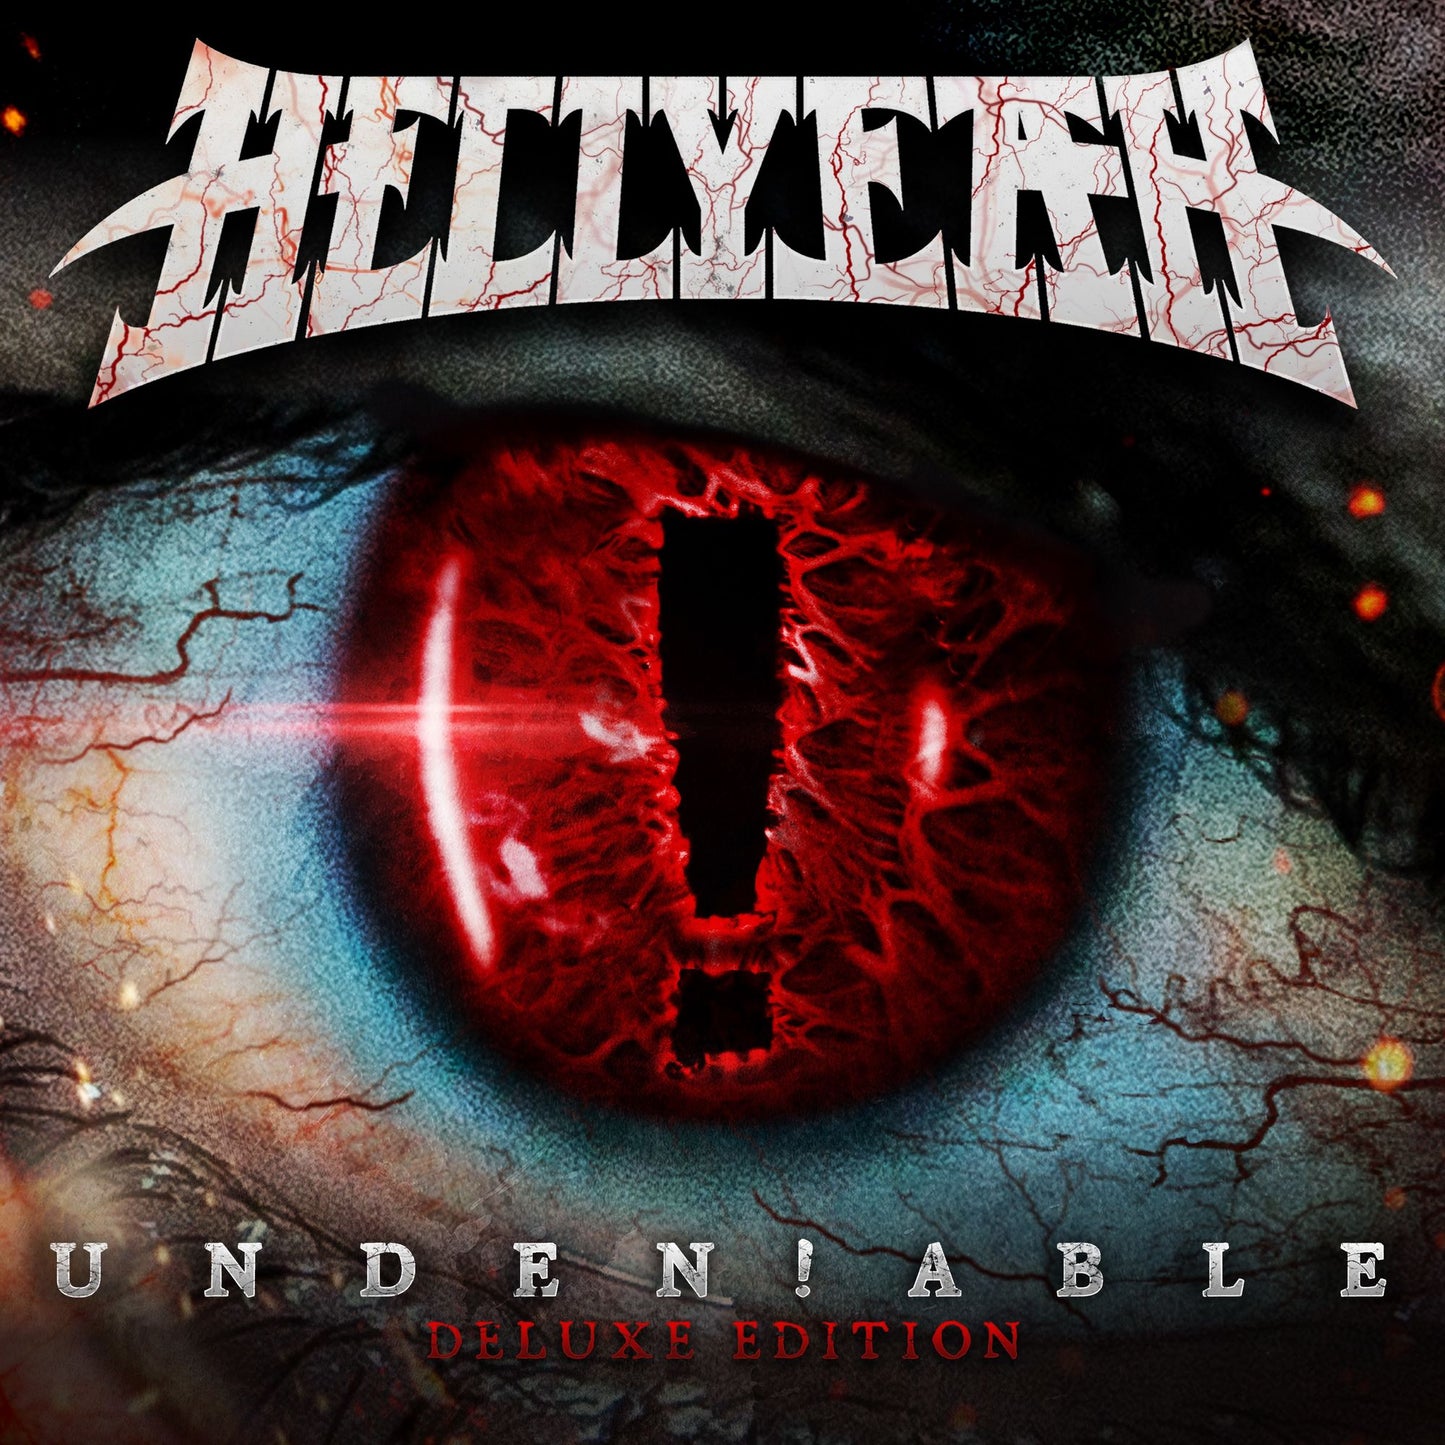 Hellyeah - Unden!able -  Deluxe Edition - CD